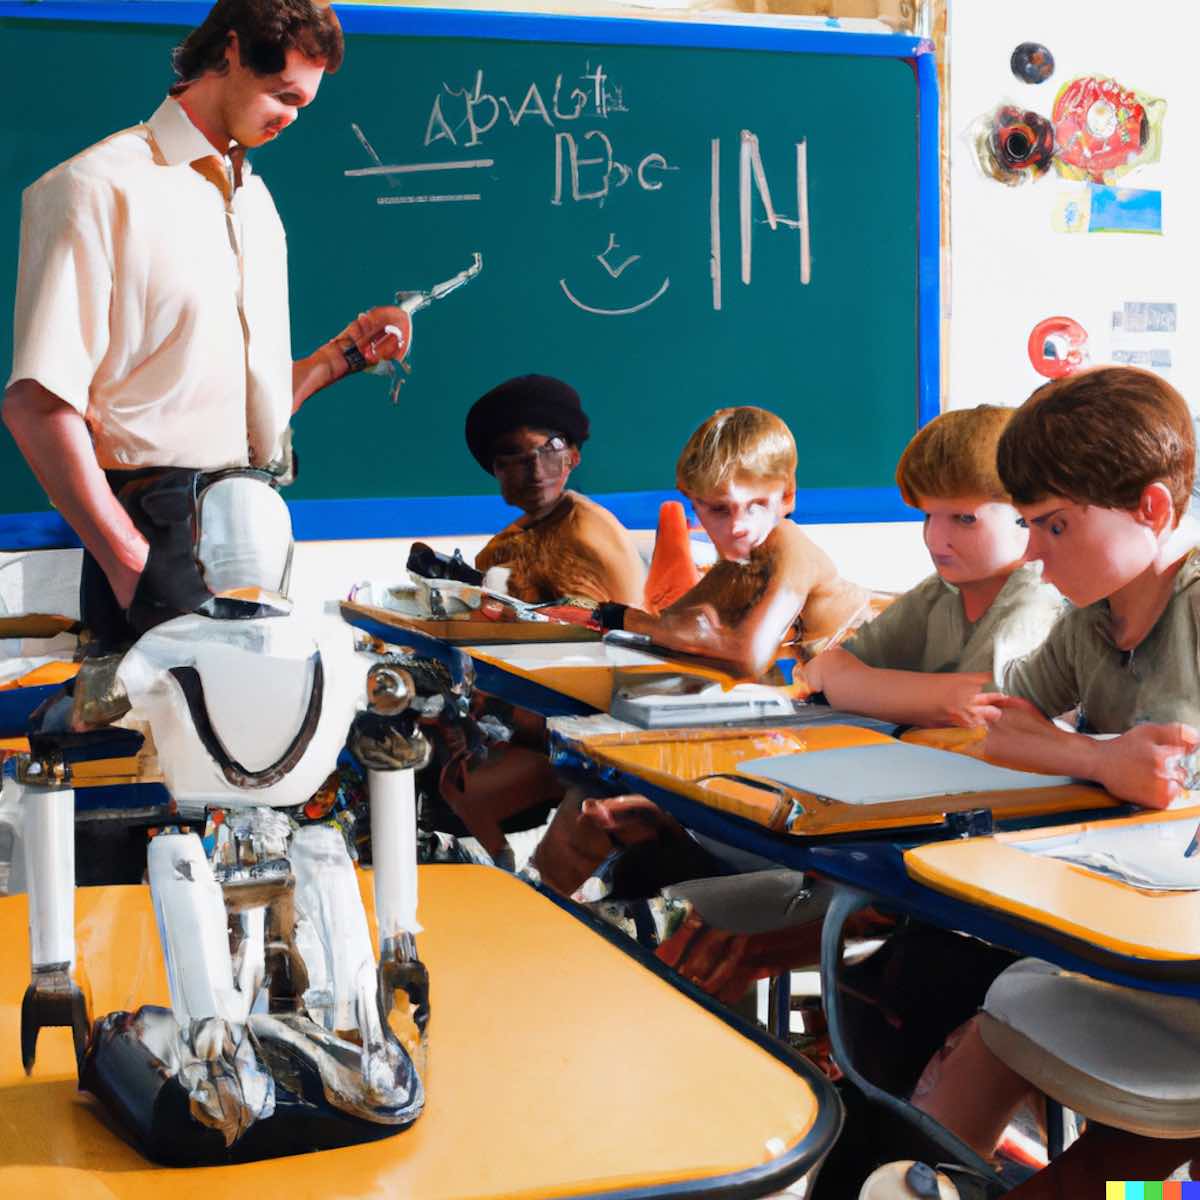 "A group of baby Droids in a mathematics high school class paying attention to their human
teacher."
